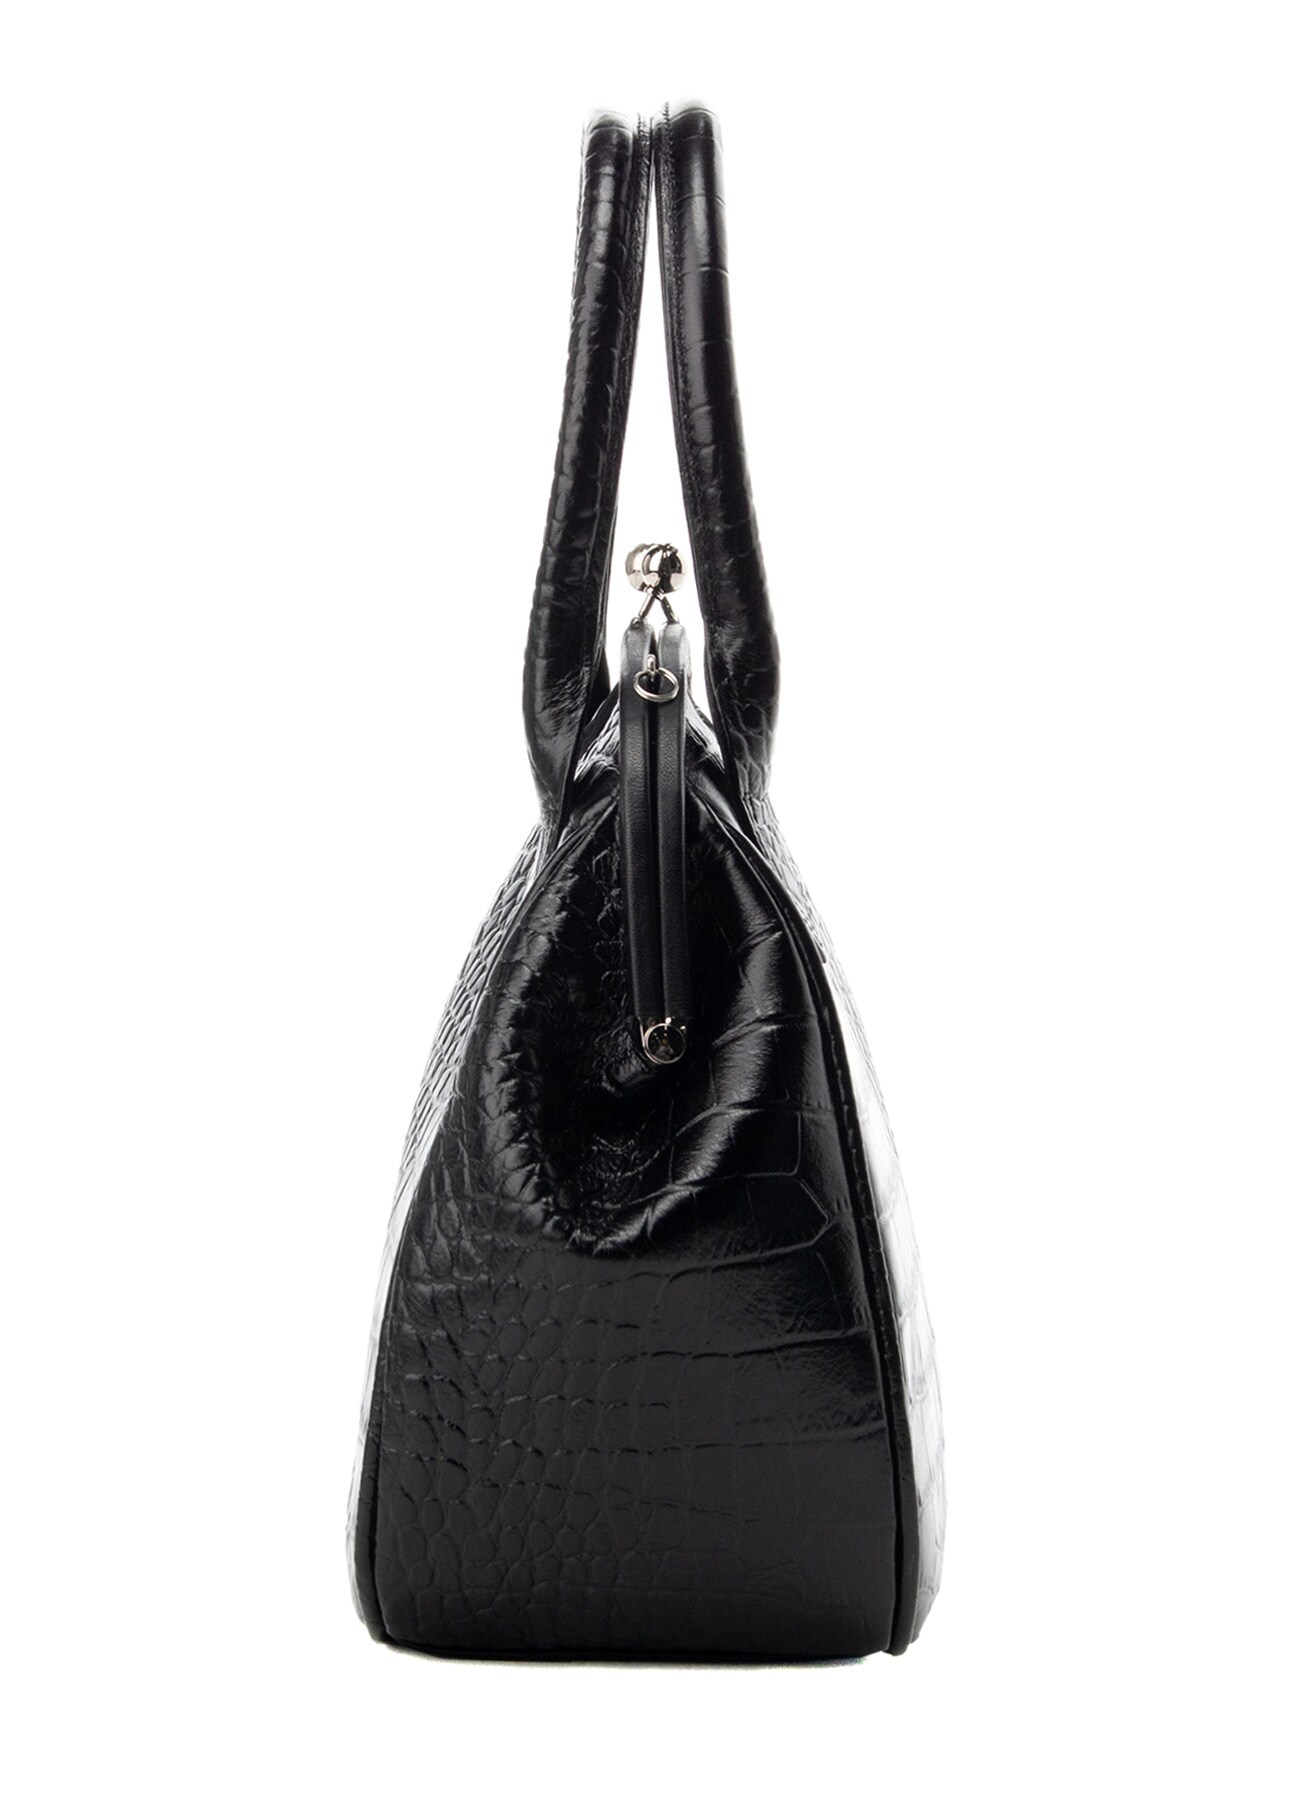 EMBOSSED CROCODILE LEATHER ROUND CLAPS BAG